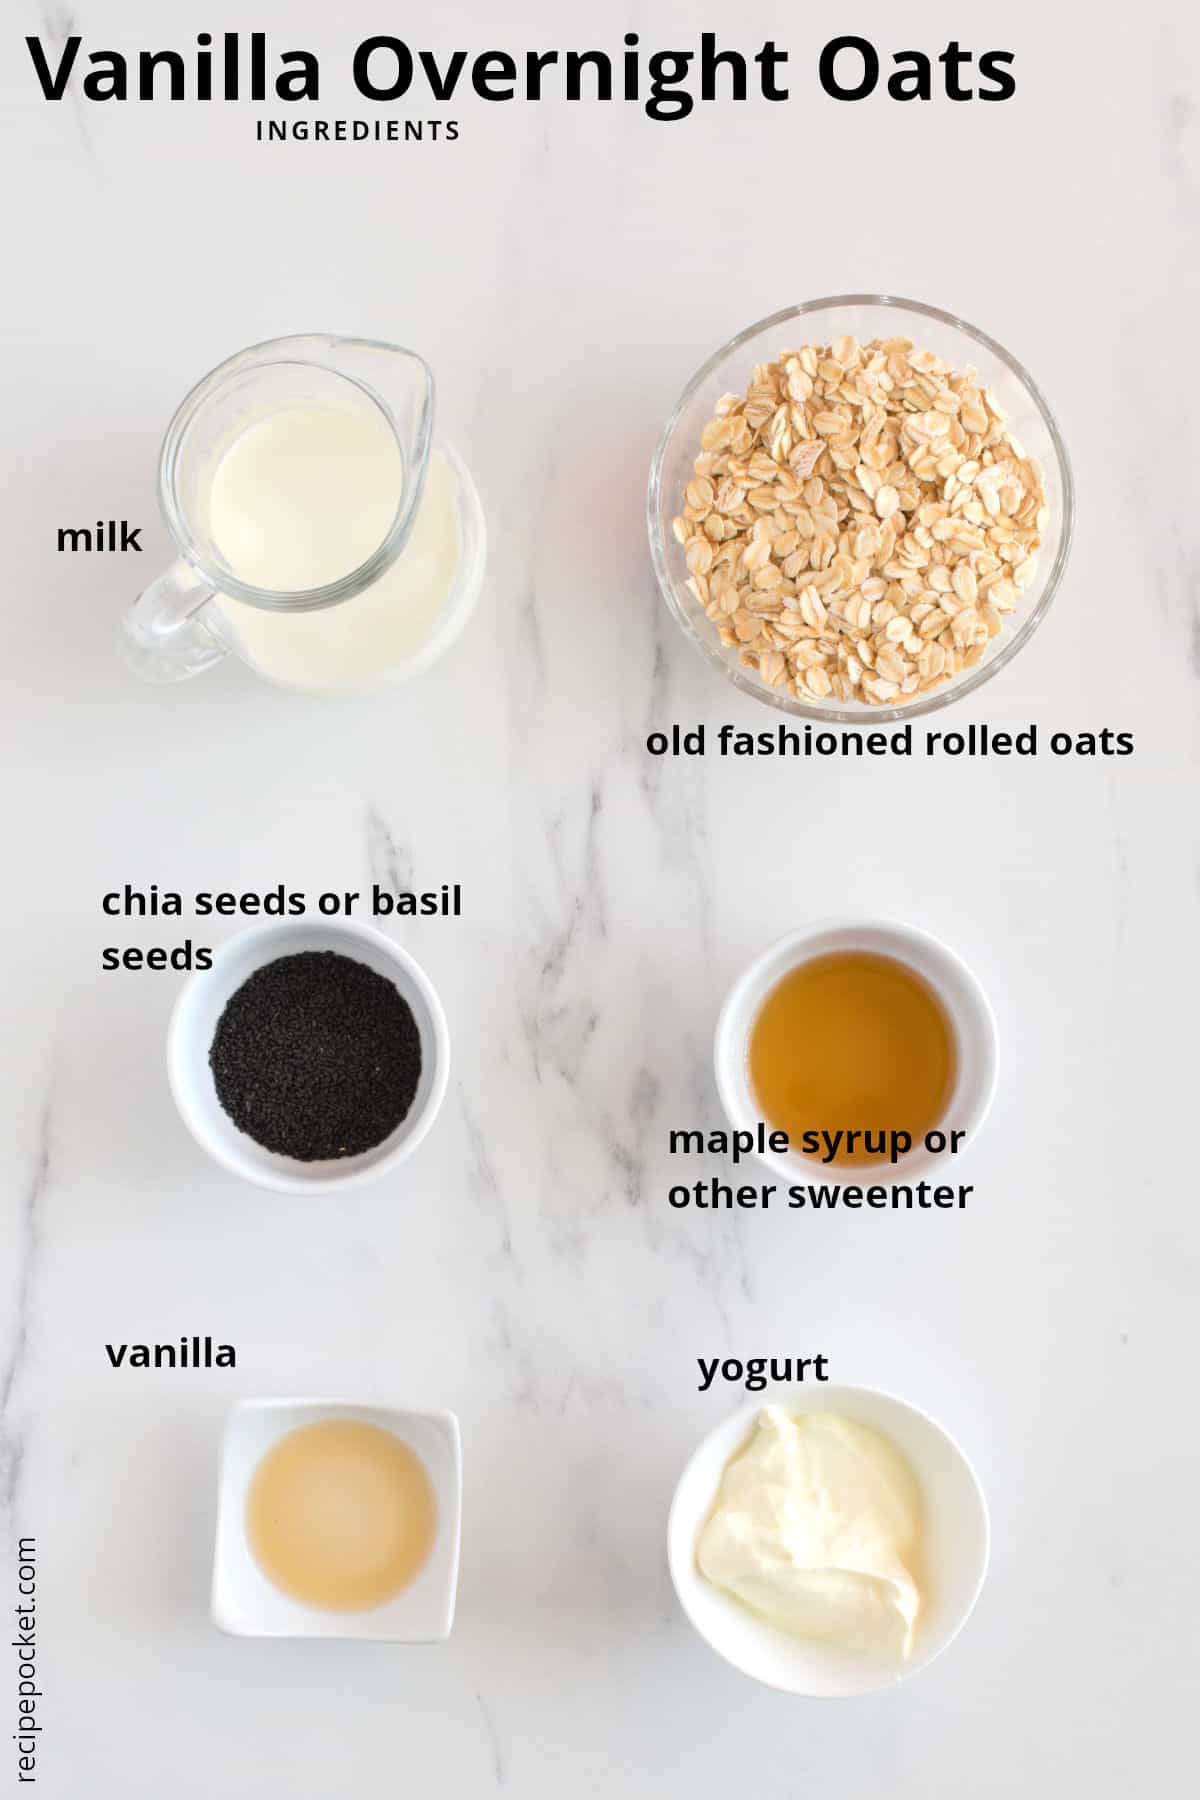 Ingredients image for vanilla overnight oatmeal.